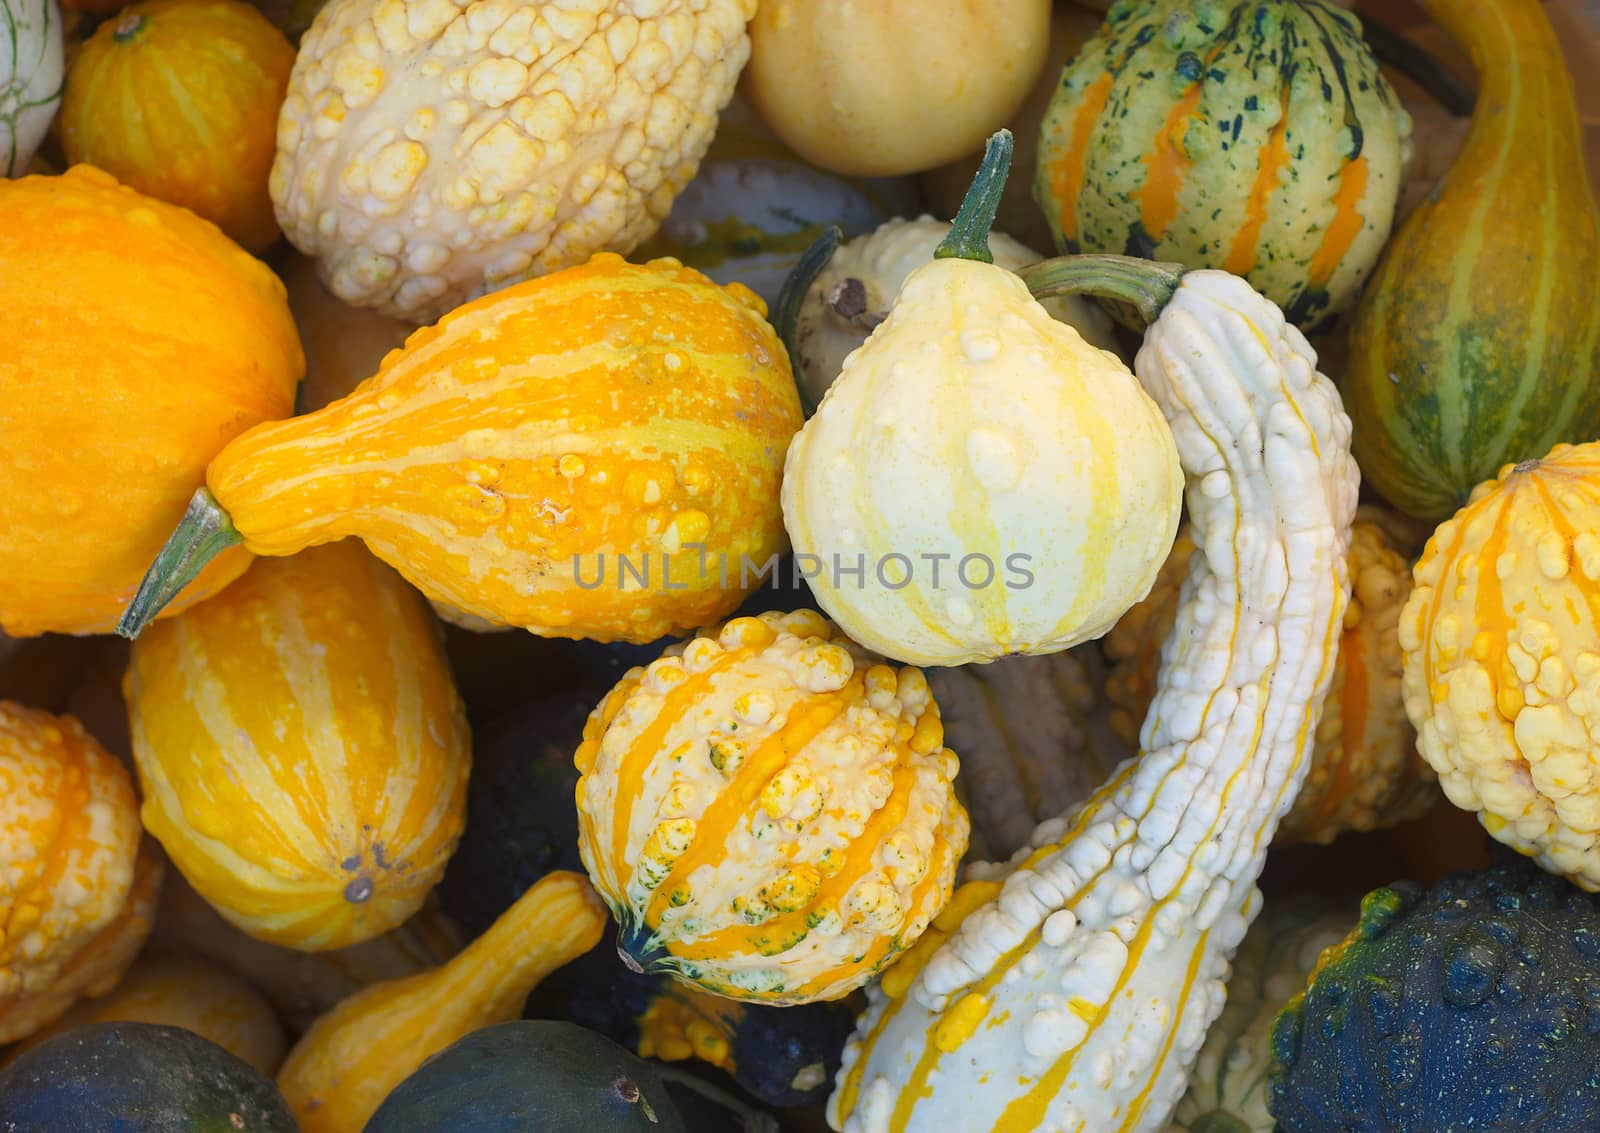 halloween or thanksgiving many kind of squash pumpkins in october or november by jacquesdurocher